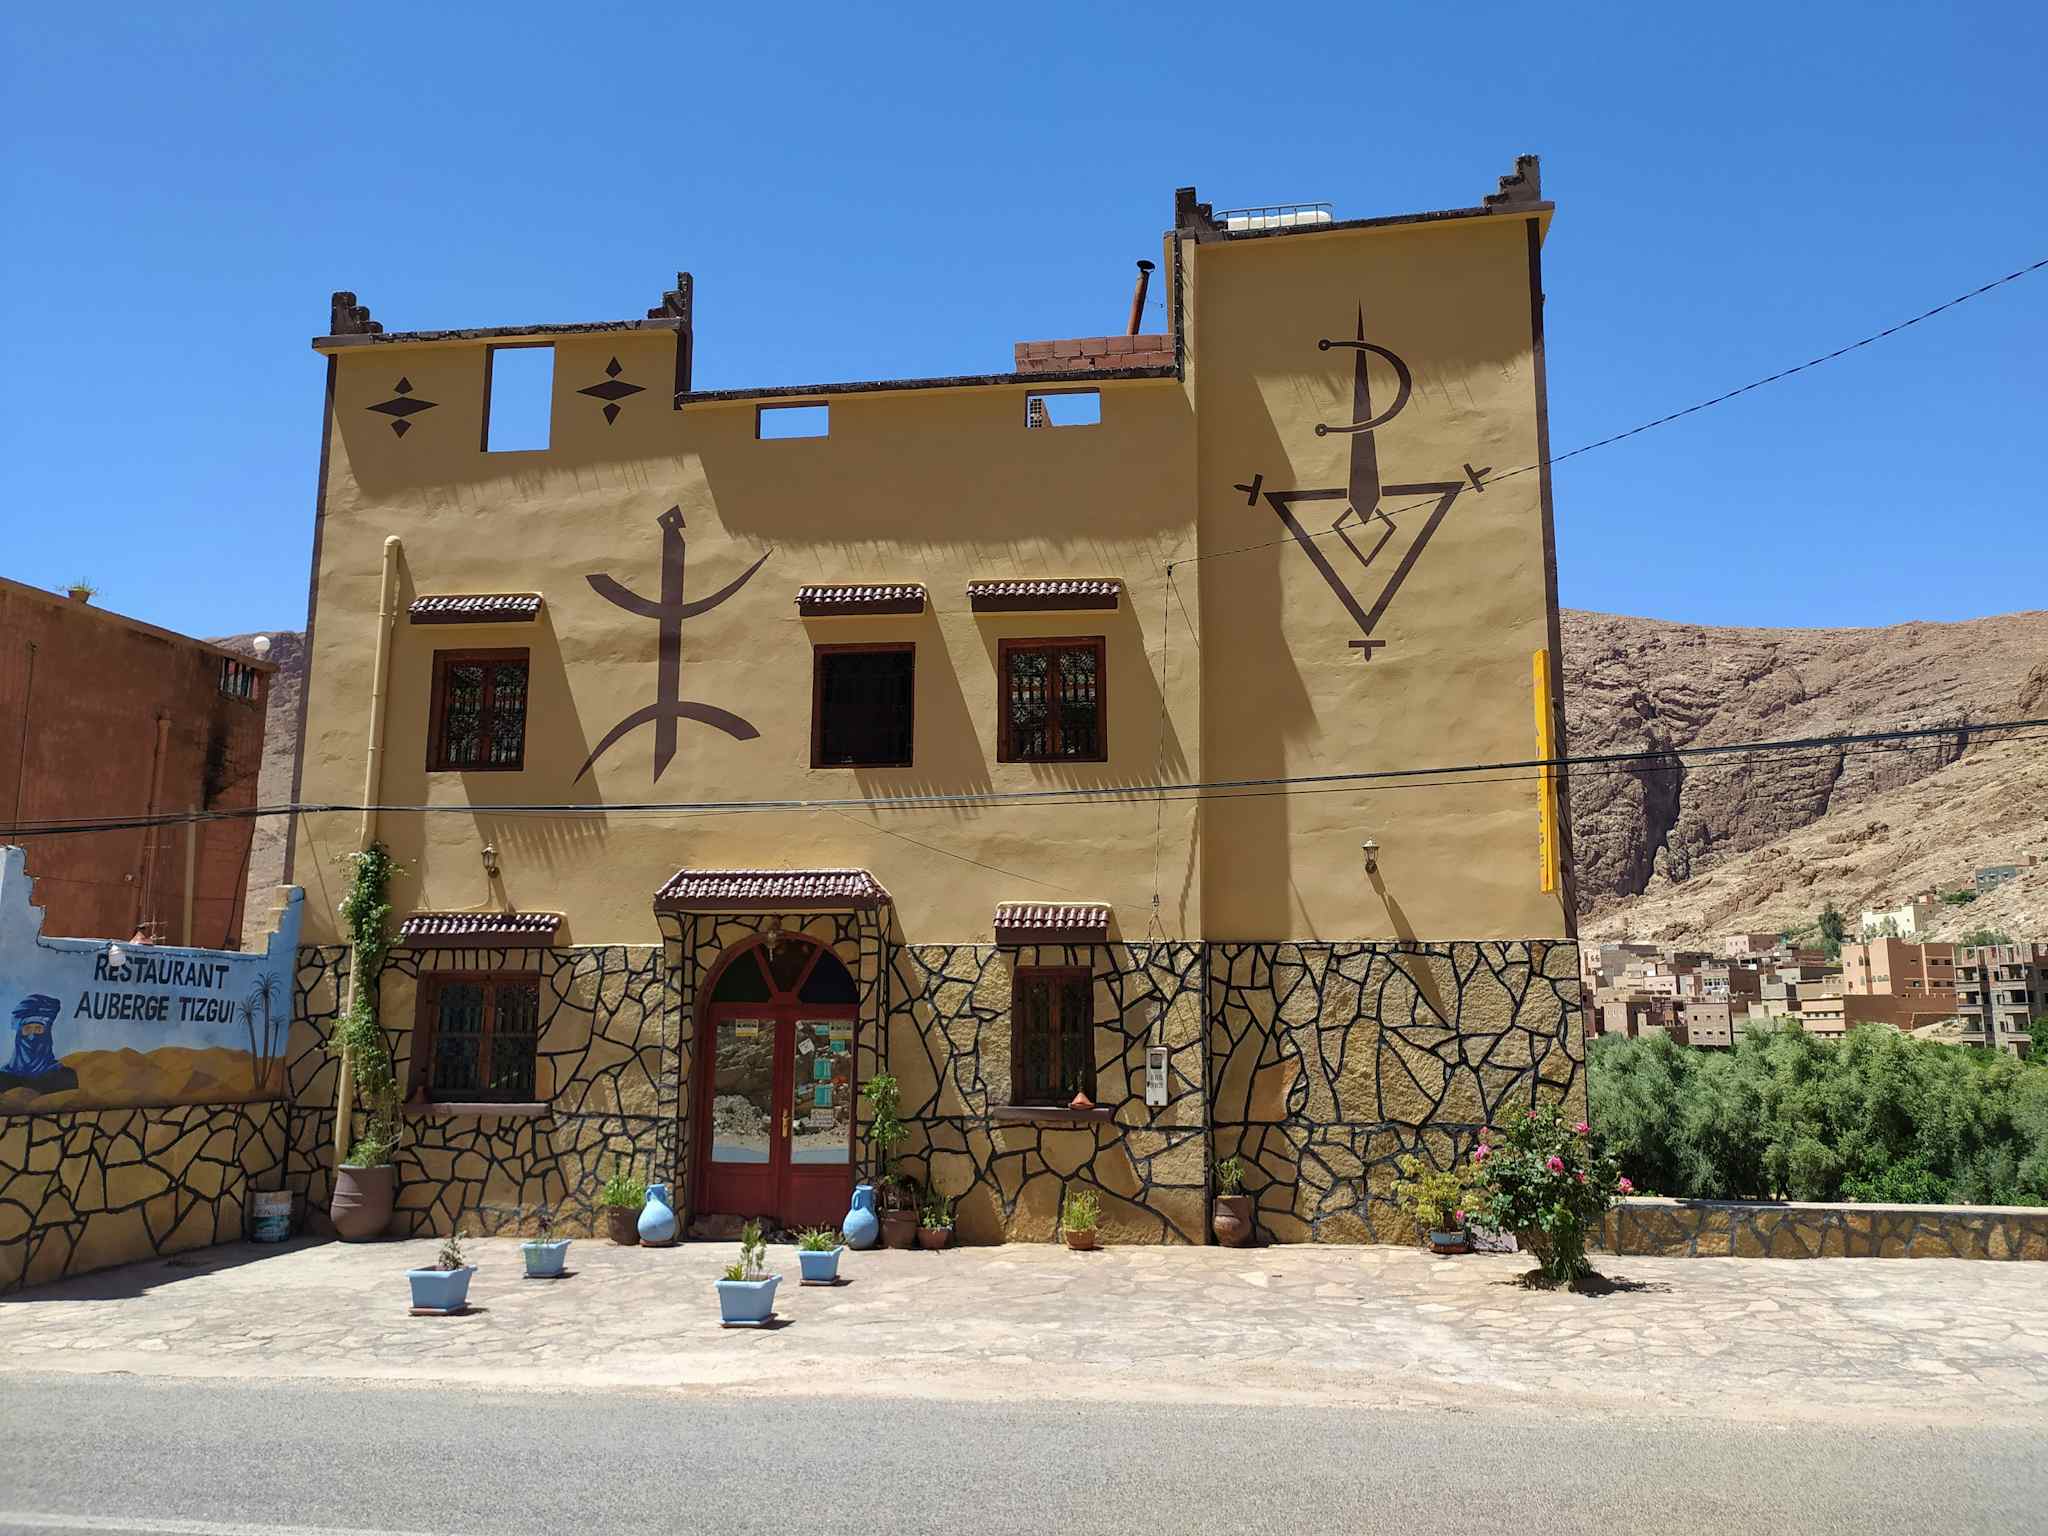 The Auberge Tizgui near Todra Gorge in Morocco. 